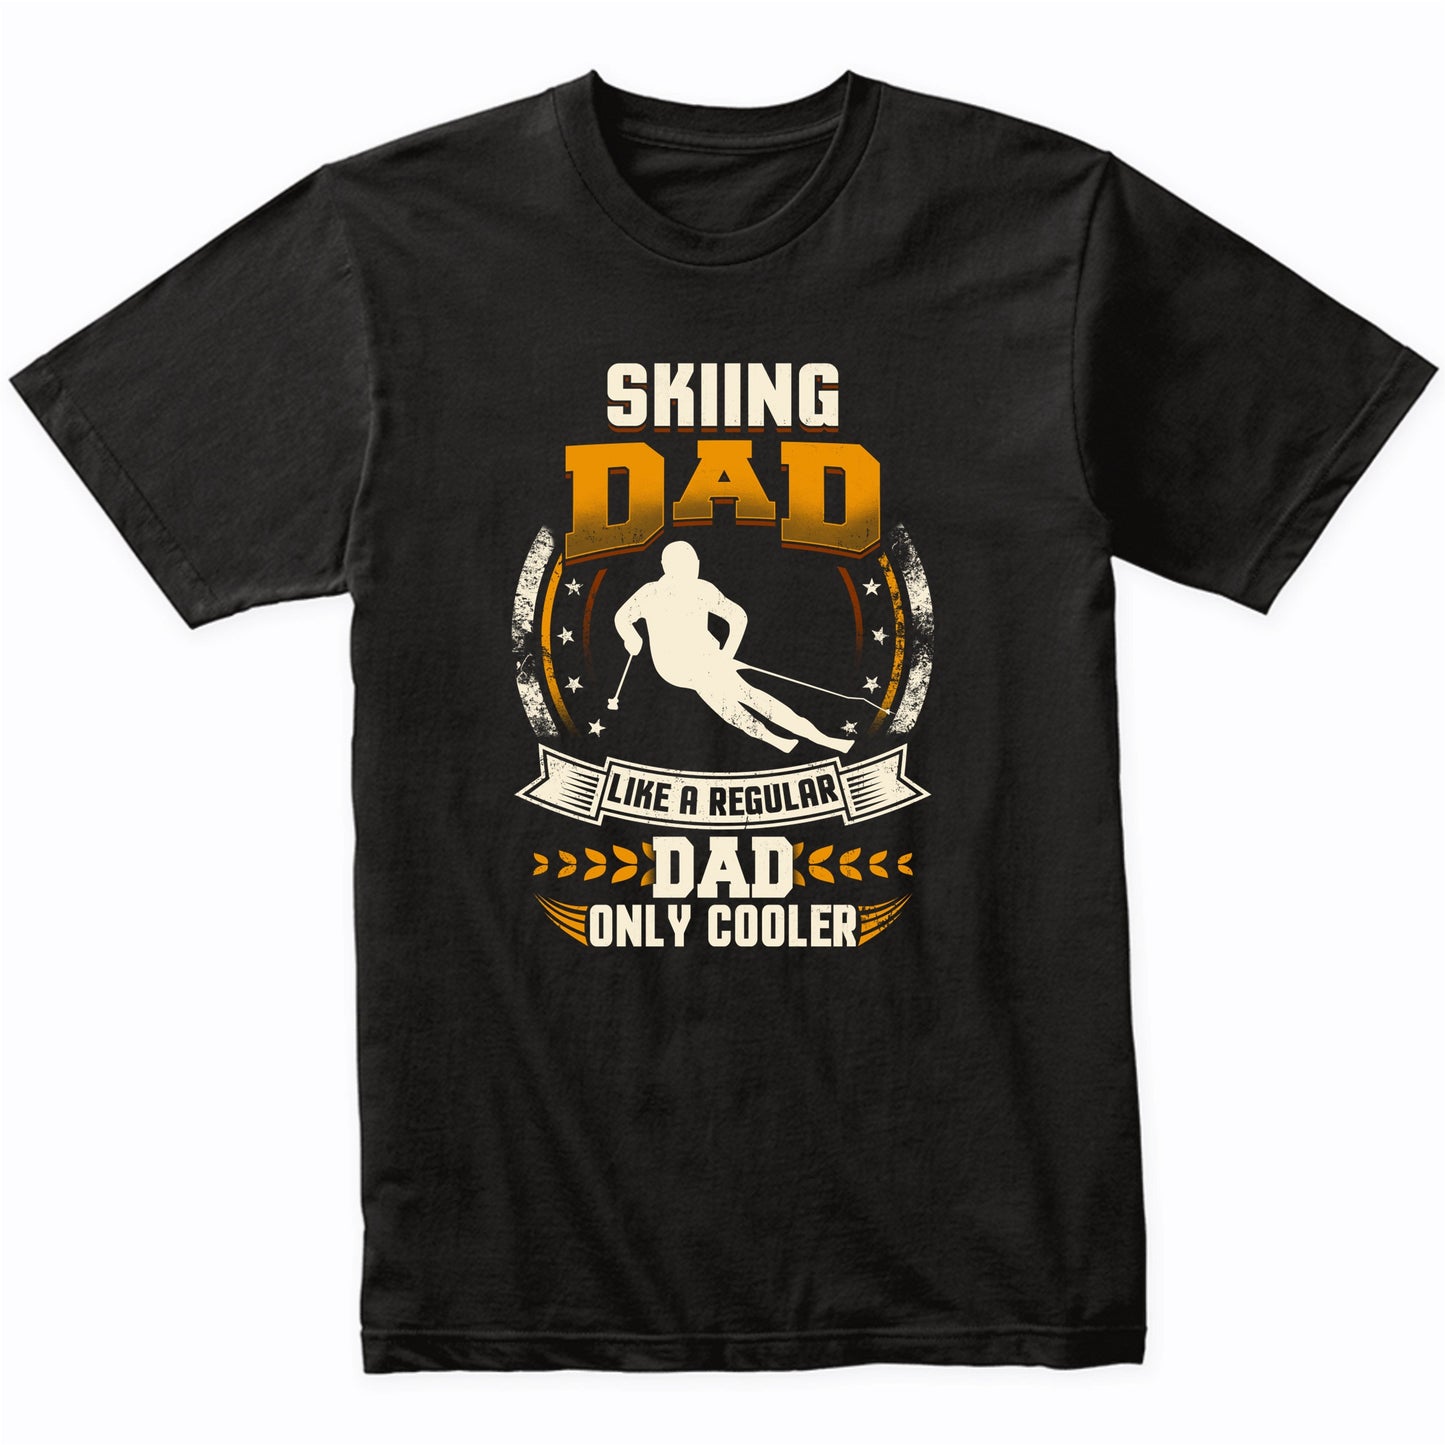 Skiing Dad Like A Regular Dad Only Cooler Funny T-Shirt